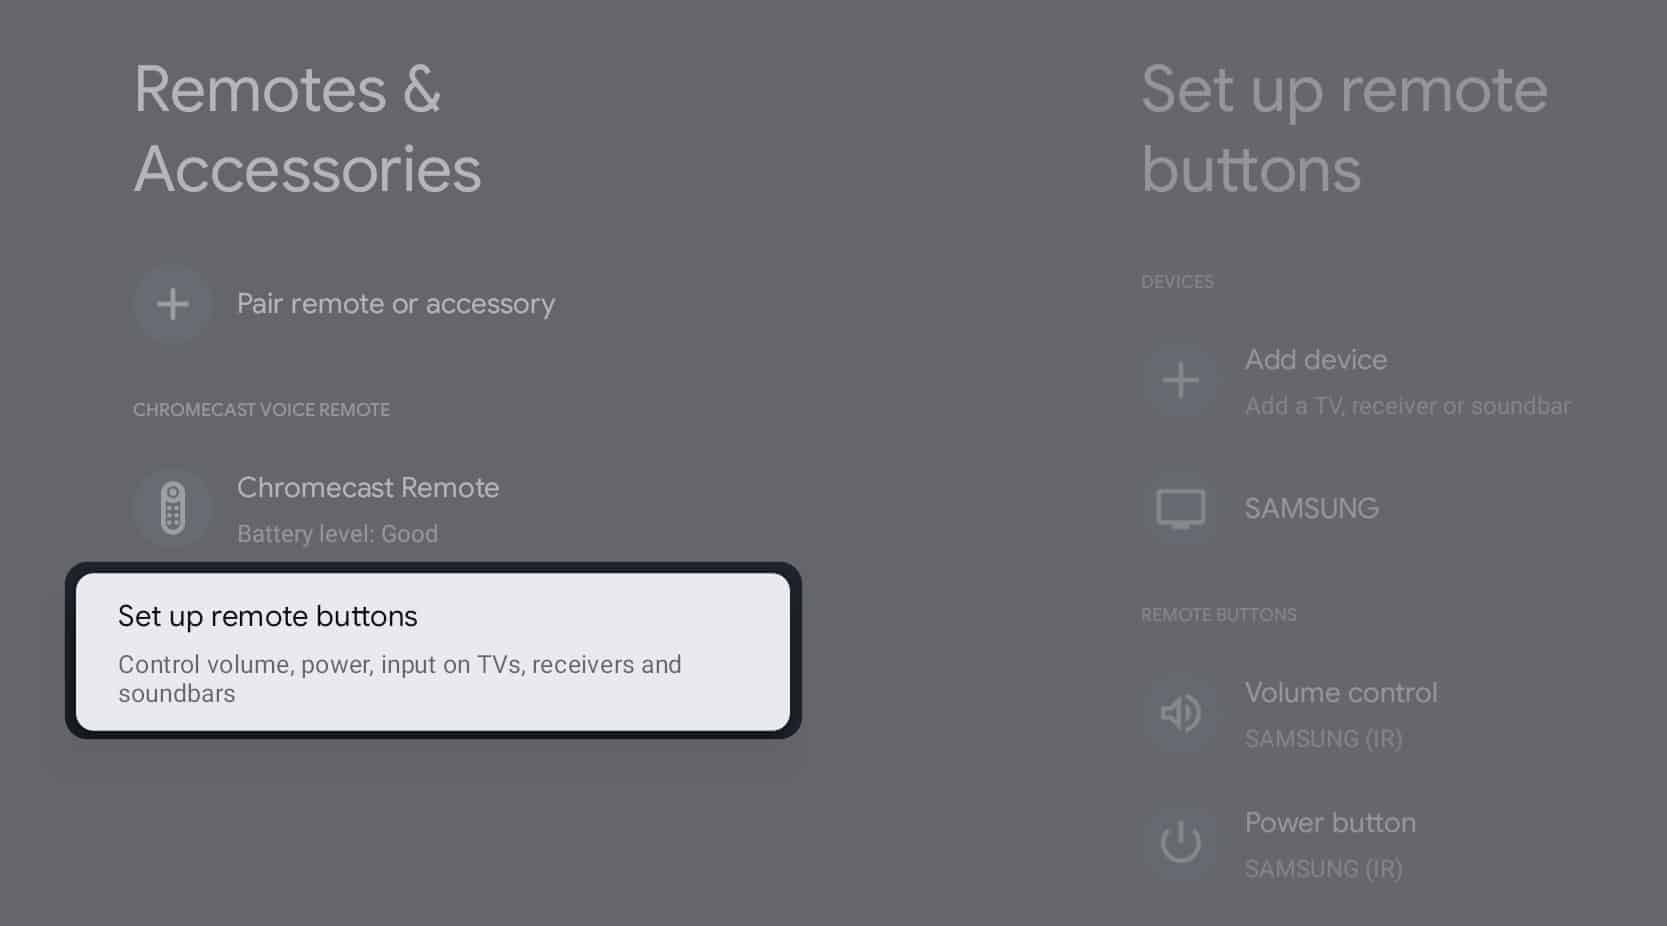 Select Set up remote buttons